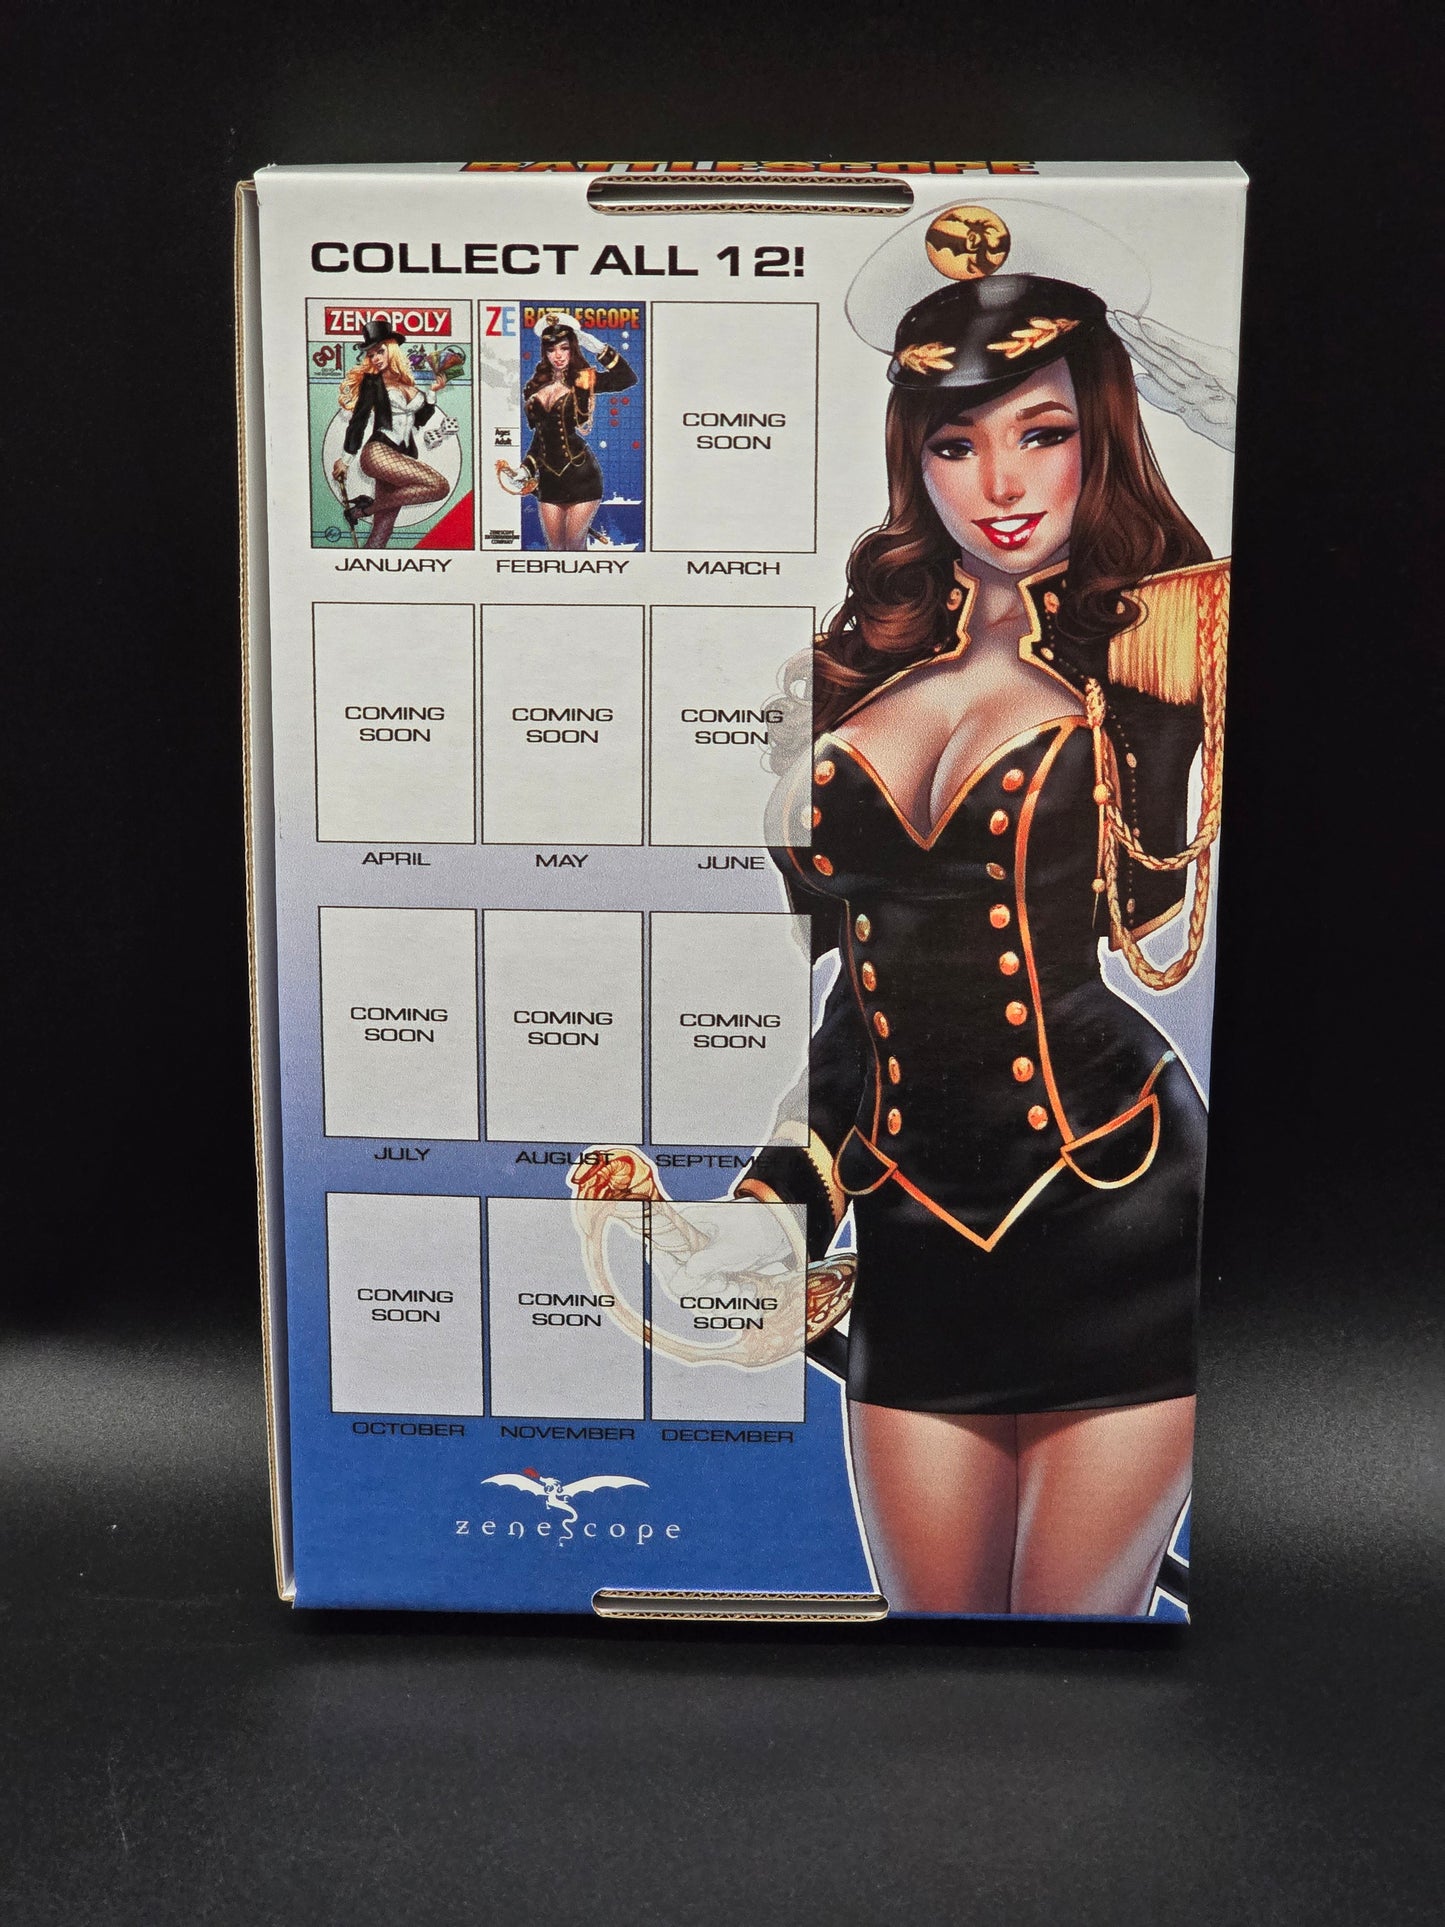 Zenescope Collectible Comic Book Box (BOX ONLY)